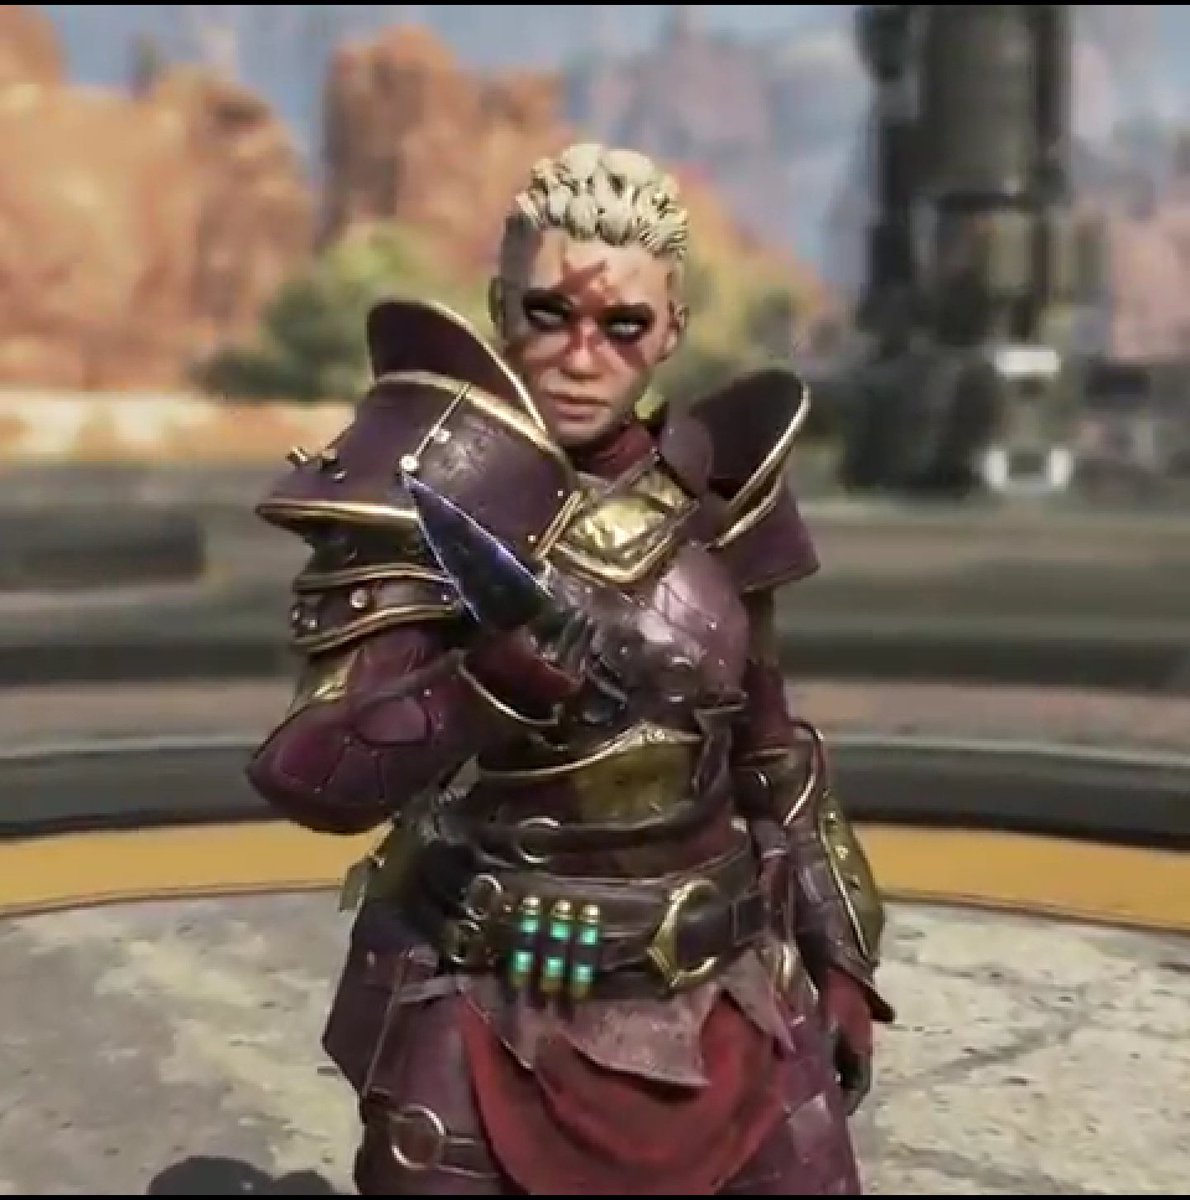 The Protector of the void skin for Wraith is looking amazing #ApexLegends.